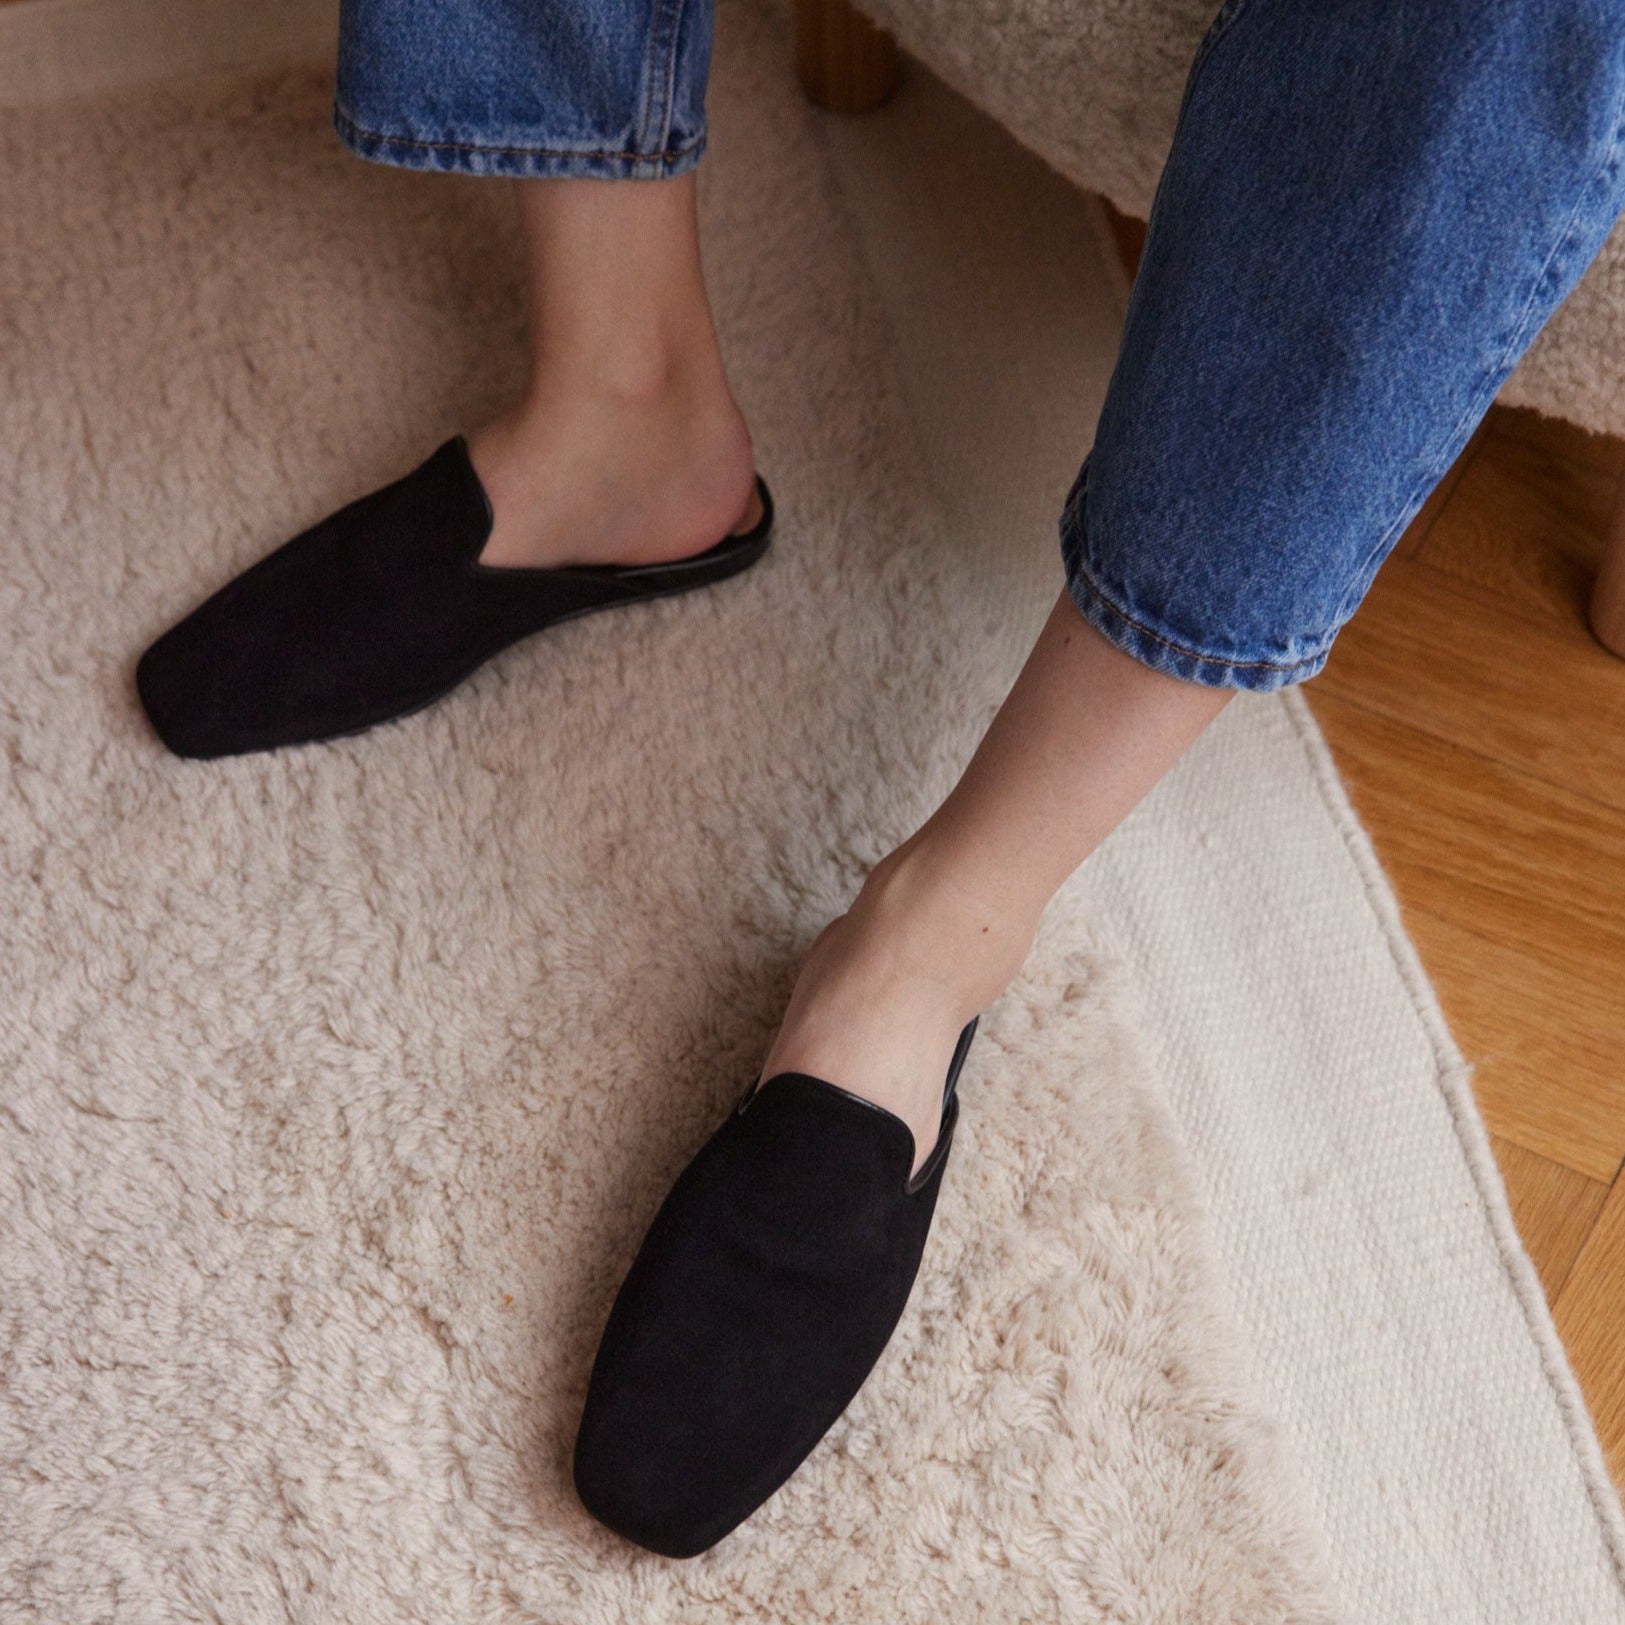 Inabo Women's Hilma slipper in black suede worn by women wearing blue jeans and standing on a white fluffy rug 